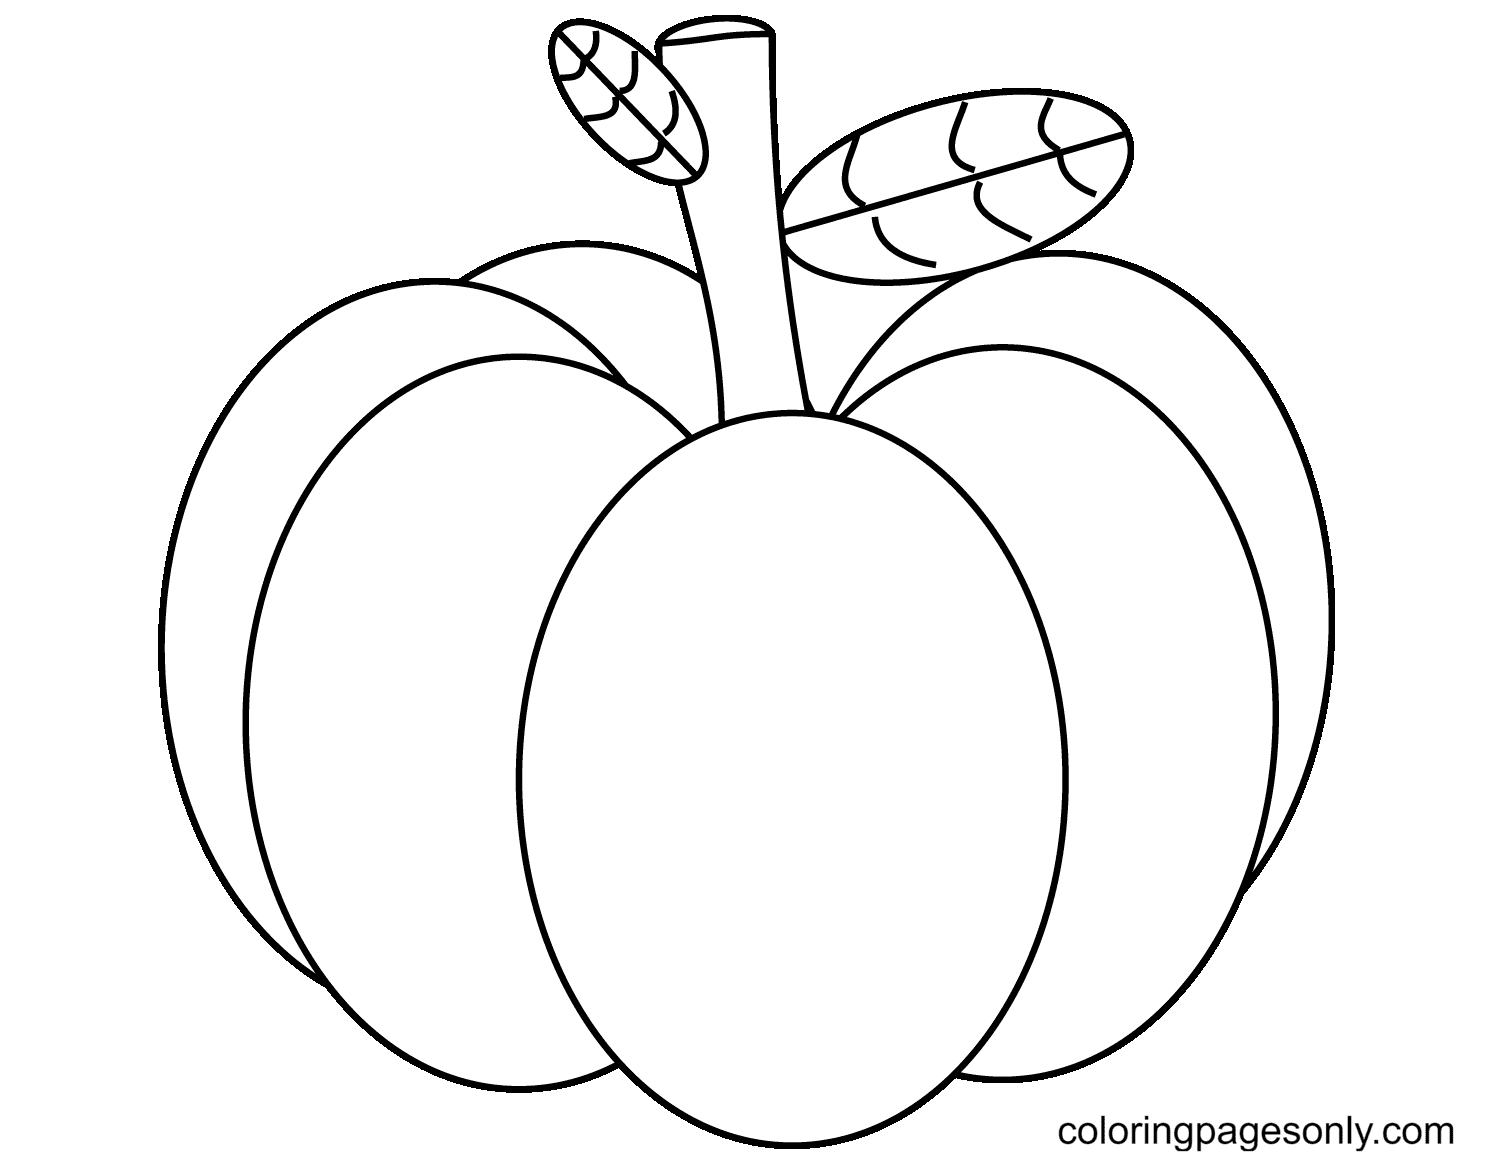 Simple Pumpkin Free Coloring Page